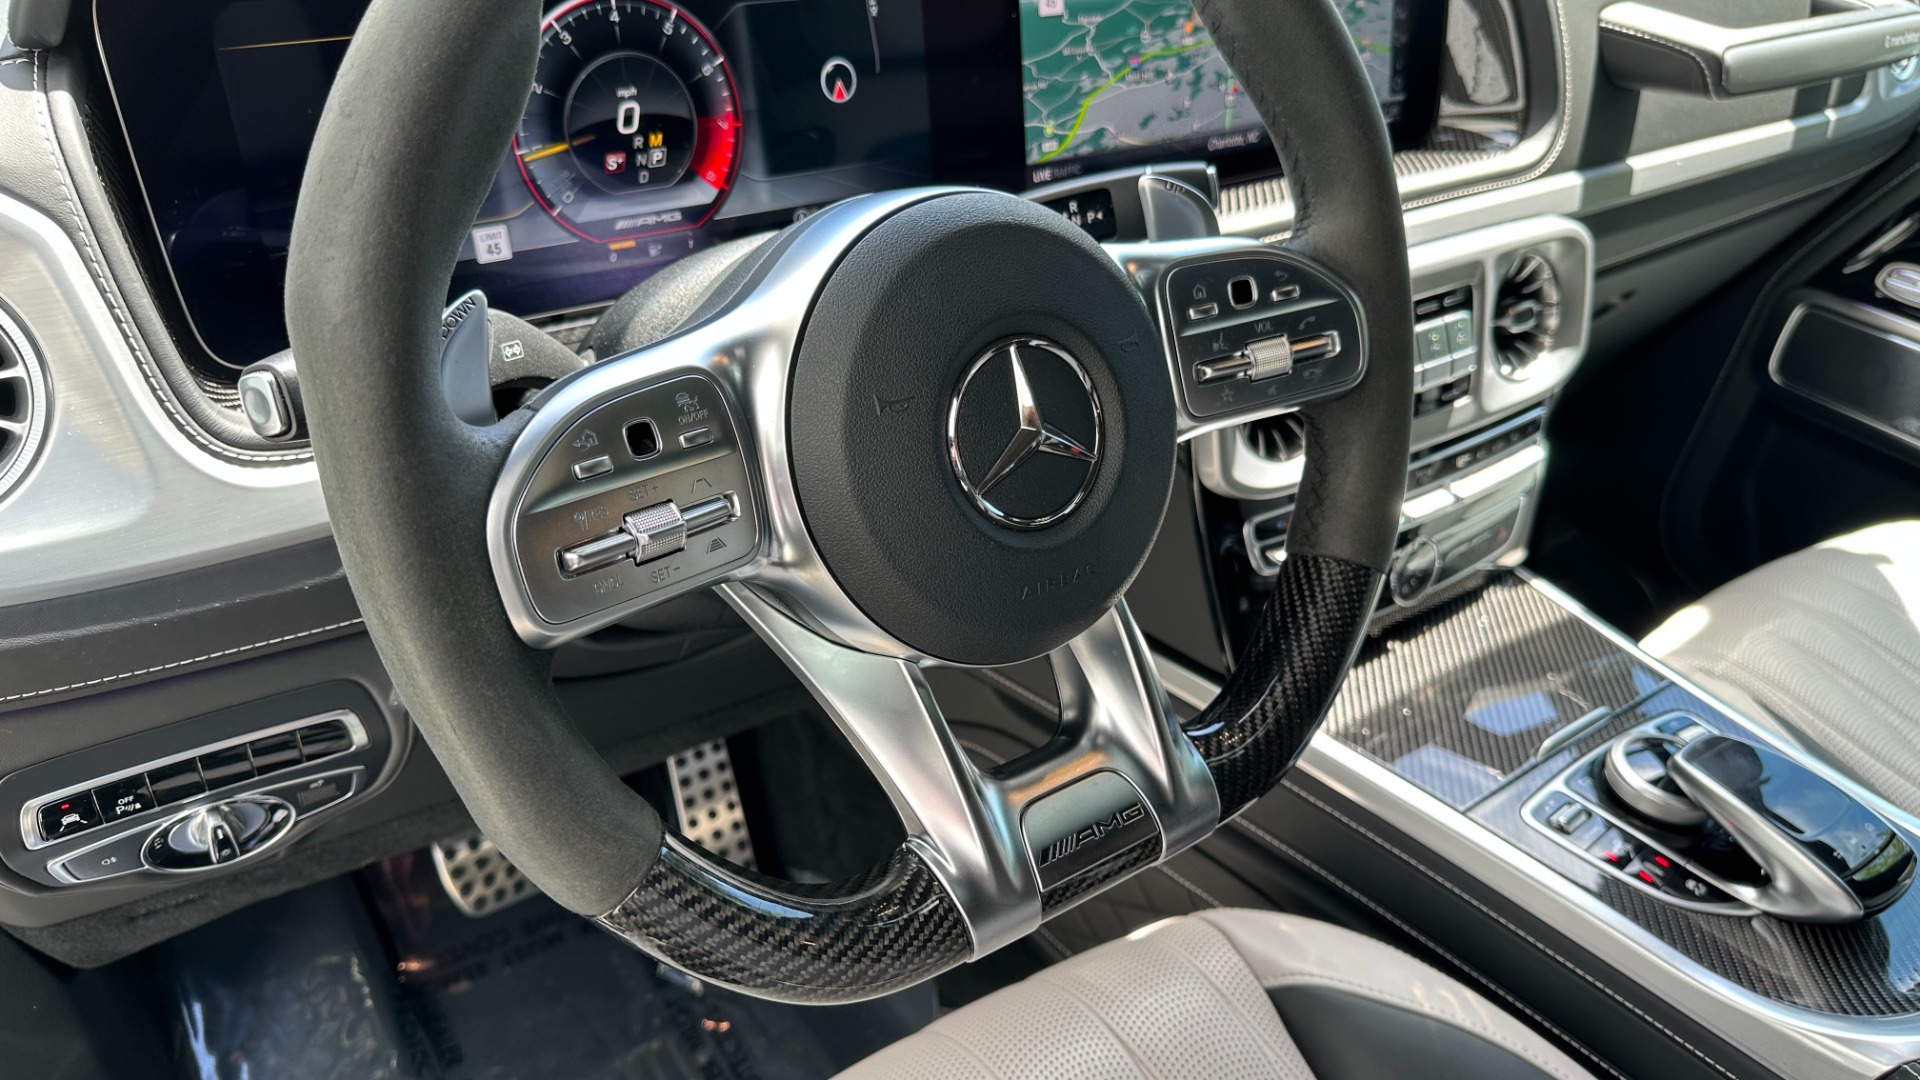 Used 2020 Mercedes-Benz G-Class AMG G63 DESIGNO INTERIOR / AMG NIGHT PKG / CARBON FIBER TRIM for sale $165,999 at Formula Imports in Charlotte NC 28227 25